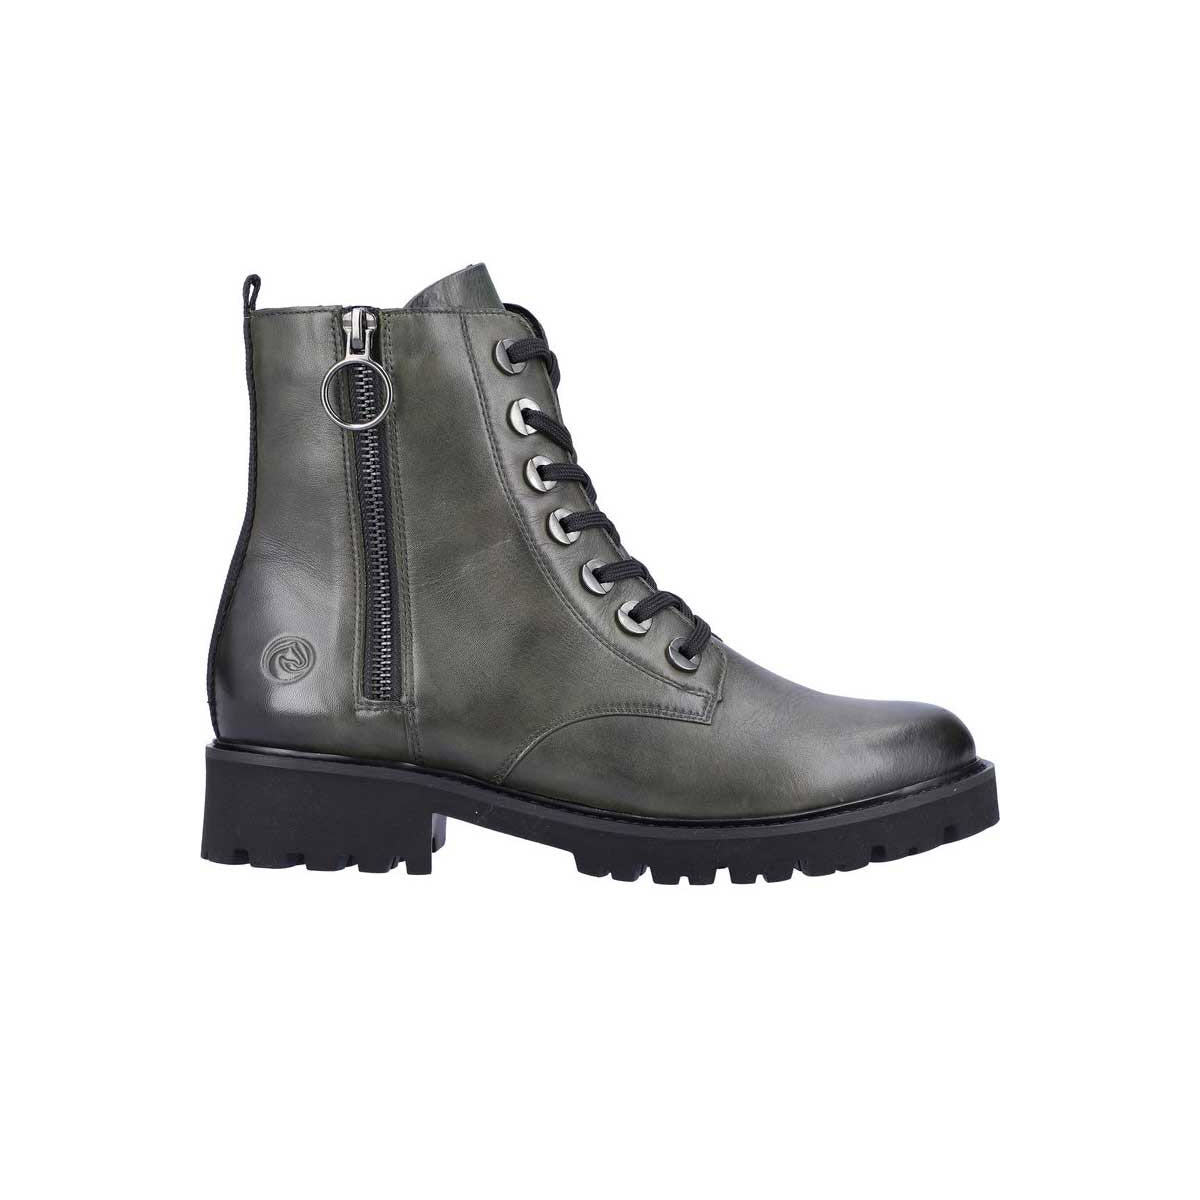 A dark green faux-leather boot with laces and a side zipper, featuring a thick rubber sole and a small circular logo on the side, Remonte Tailored Combat Bootie Forest Green - Womens.